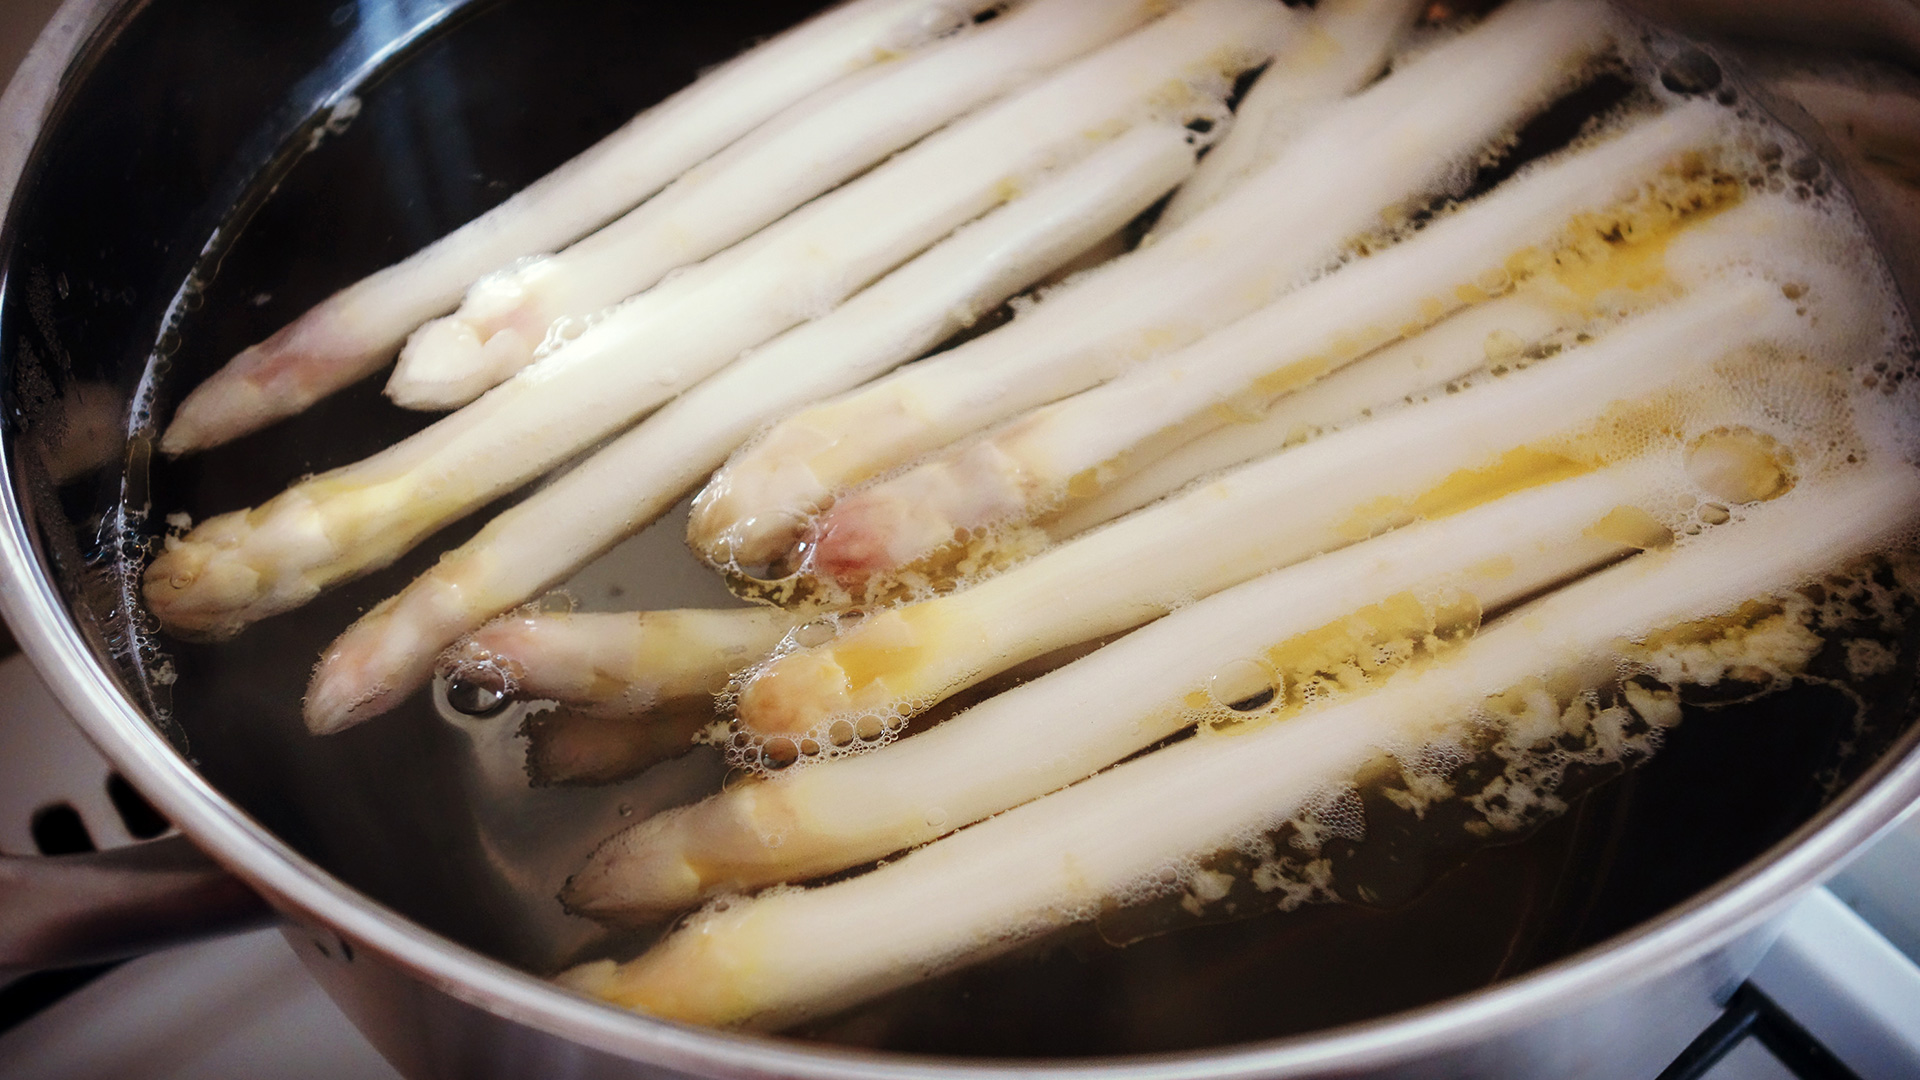 Cooking asparagus properly – These things you should know